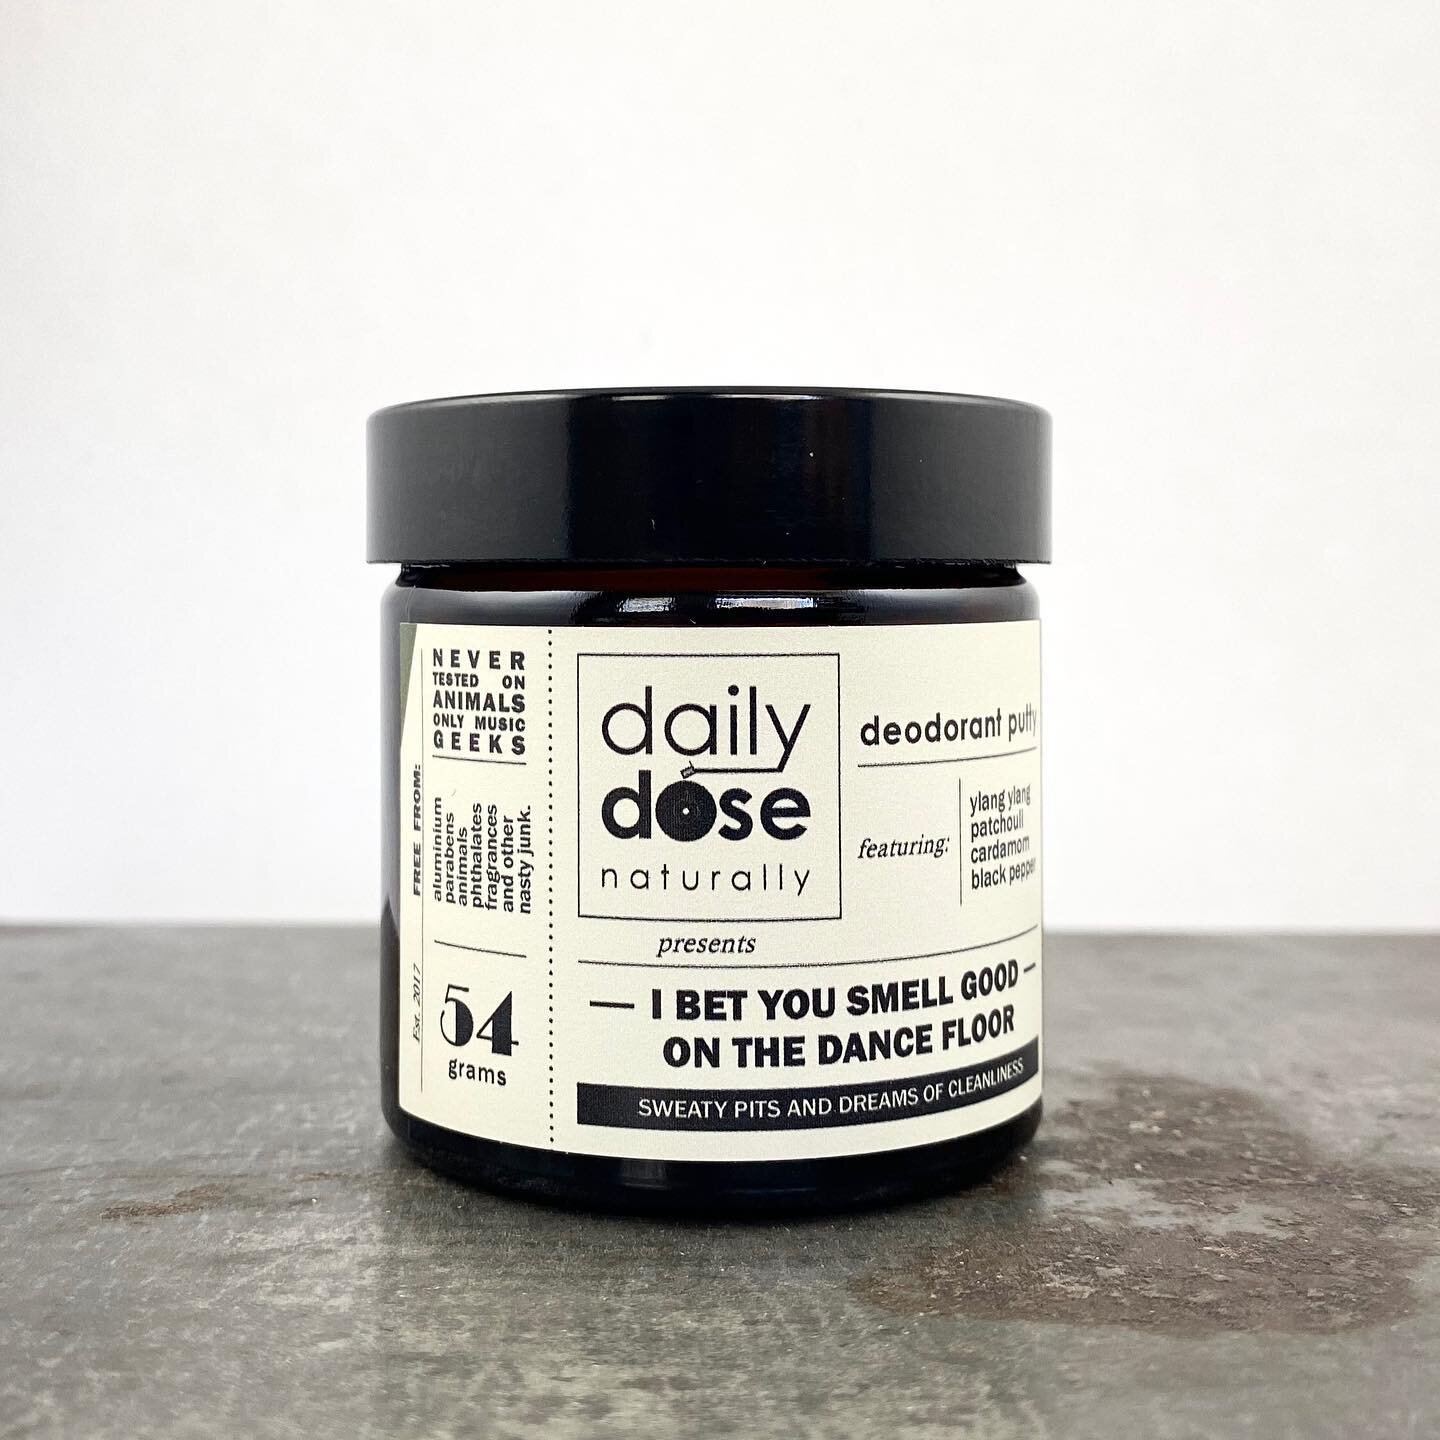 I BET YOU SMELL GOOD ON THE DANCE FLOOR 🎶 Natural Deodorant Putty 

sweaty pits and dreams of cleanliness 

Featuring: ylang ylang, patchouli, cardamom and black pepper

Warm, sweet, sensual and enticing..
We could all use a bit of spice in our live